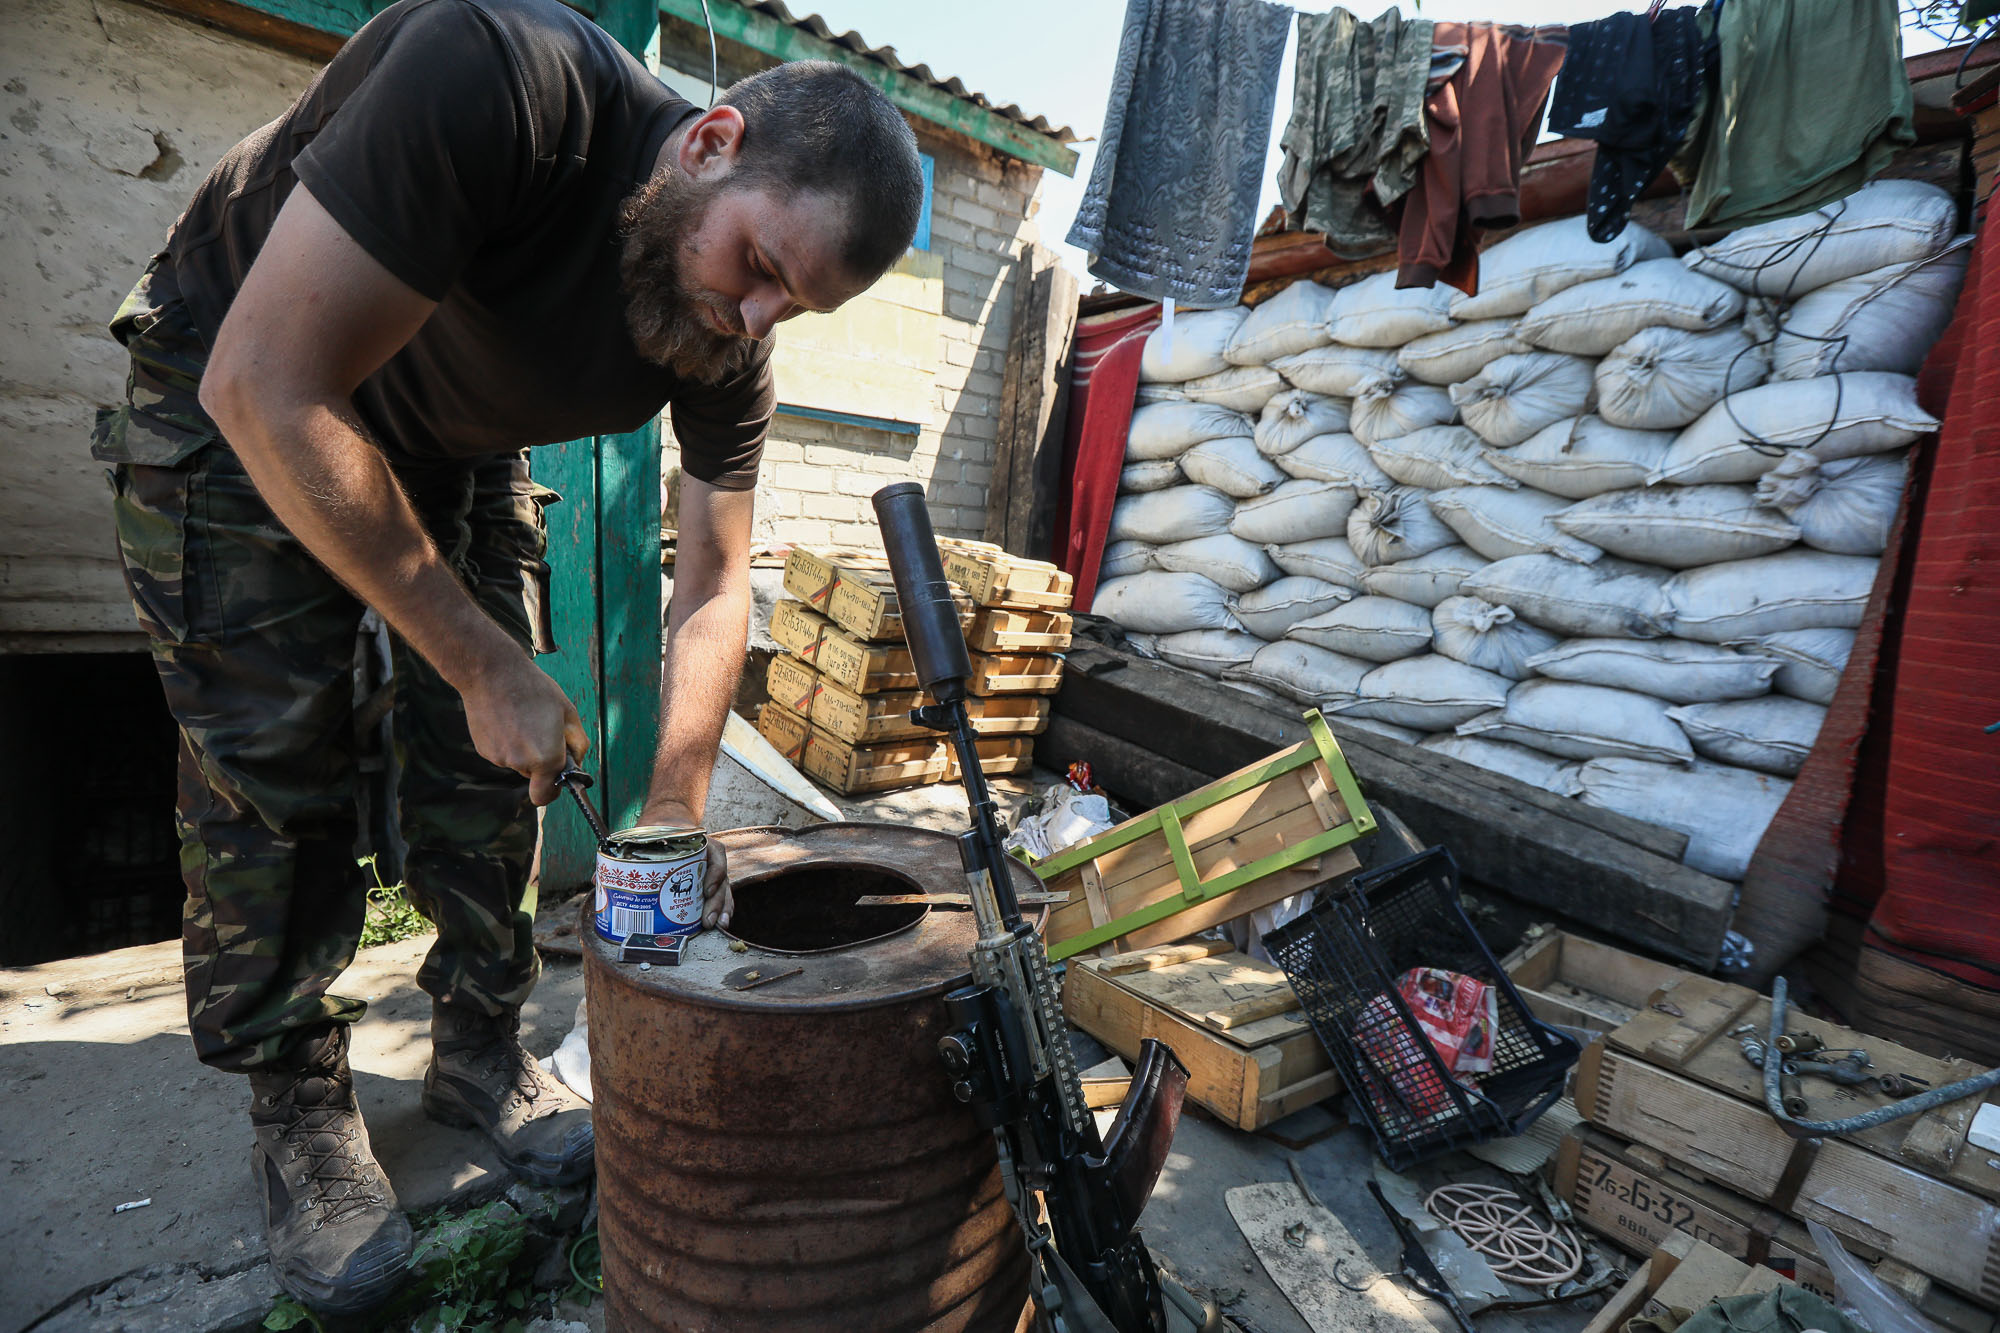 A Ukrainian soldier pries open a canned meat to feed cats at a combat post in the town of Zaitseve on June 25